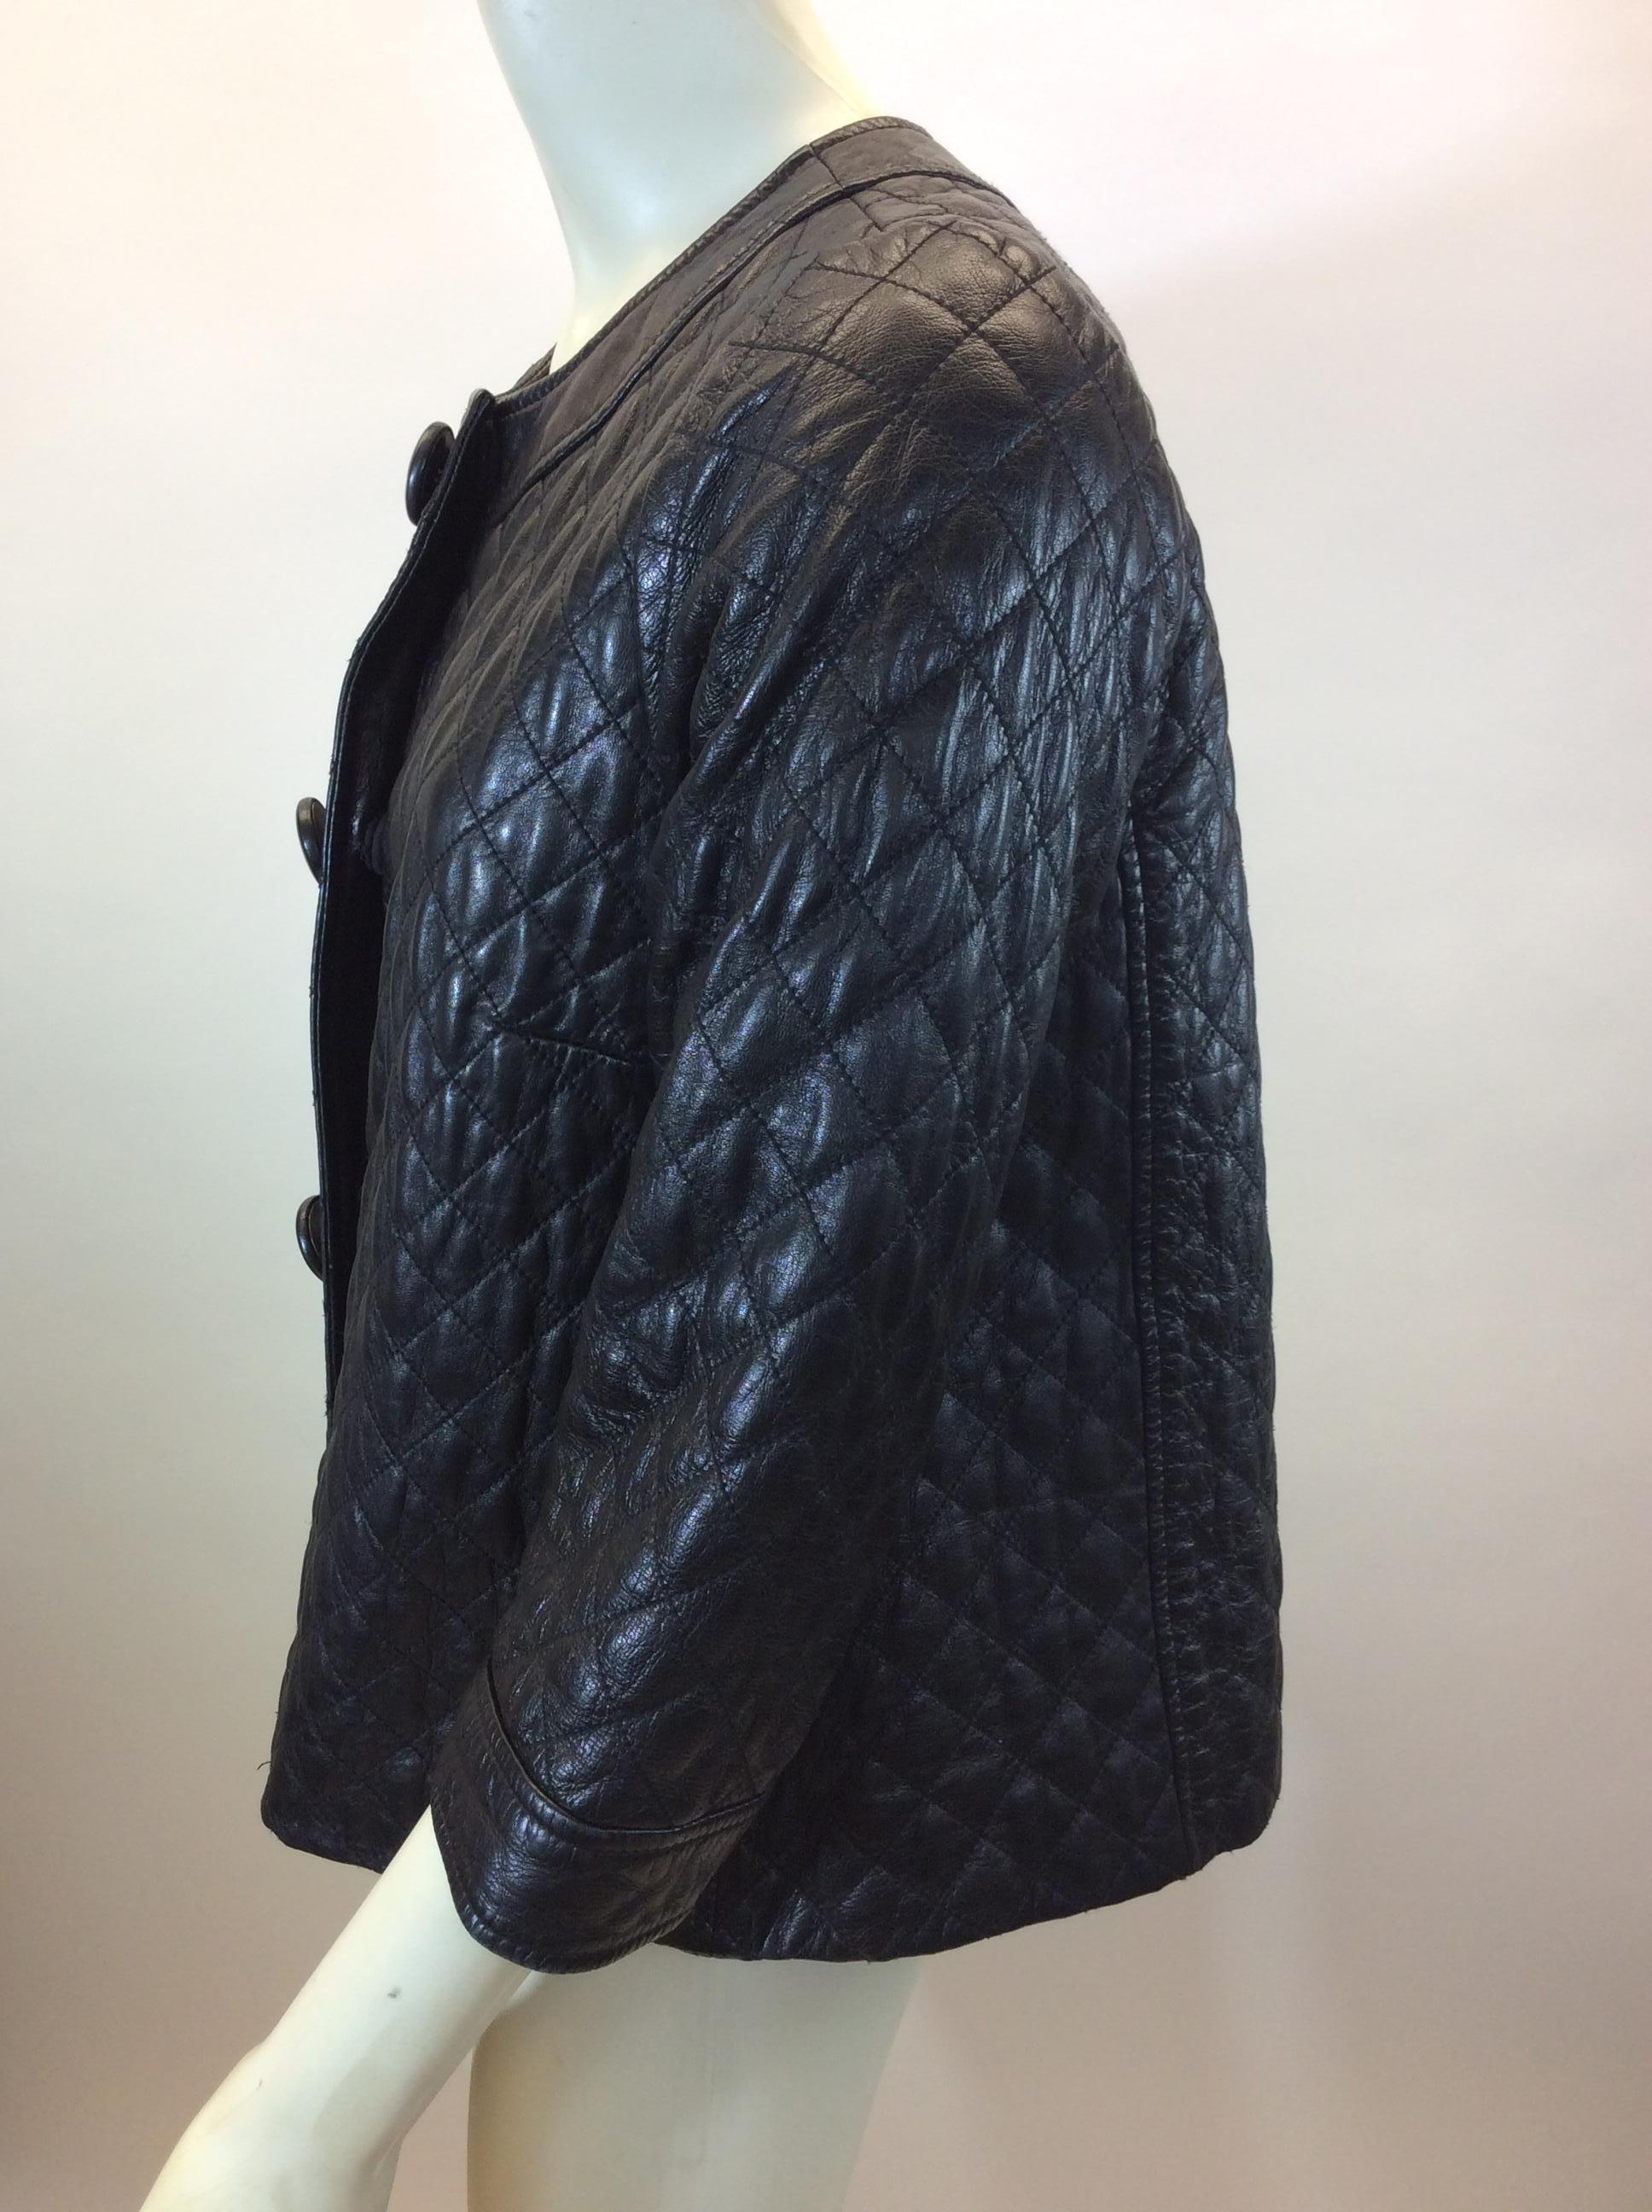 Vince Black Leather Quilted Jacket
$299
Made in China
100% Leather, Lining- 100% Acetate
Size 6
Length 22